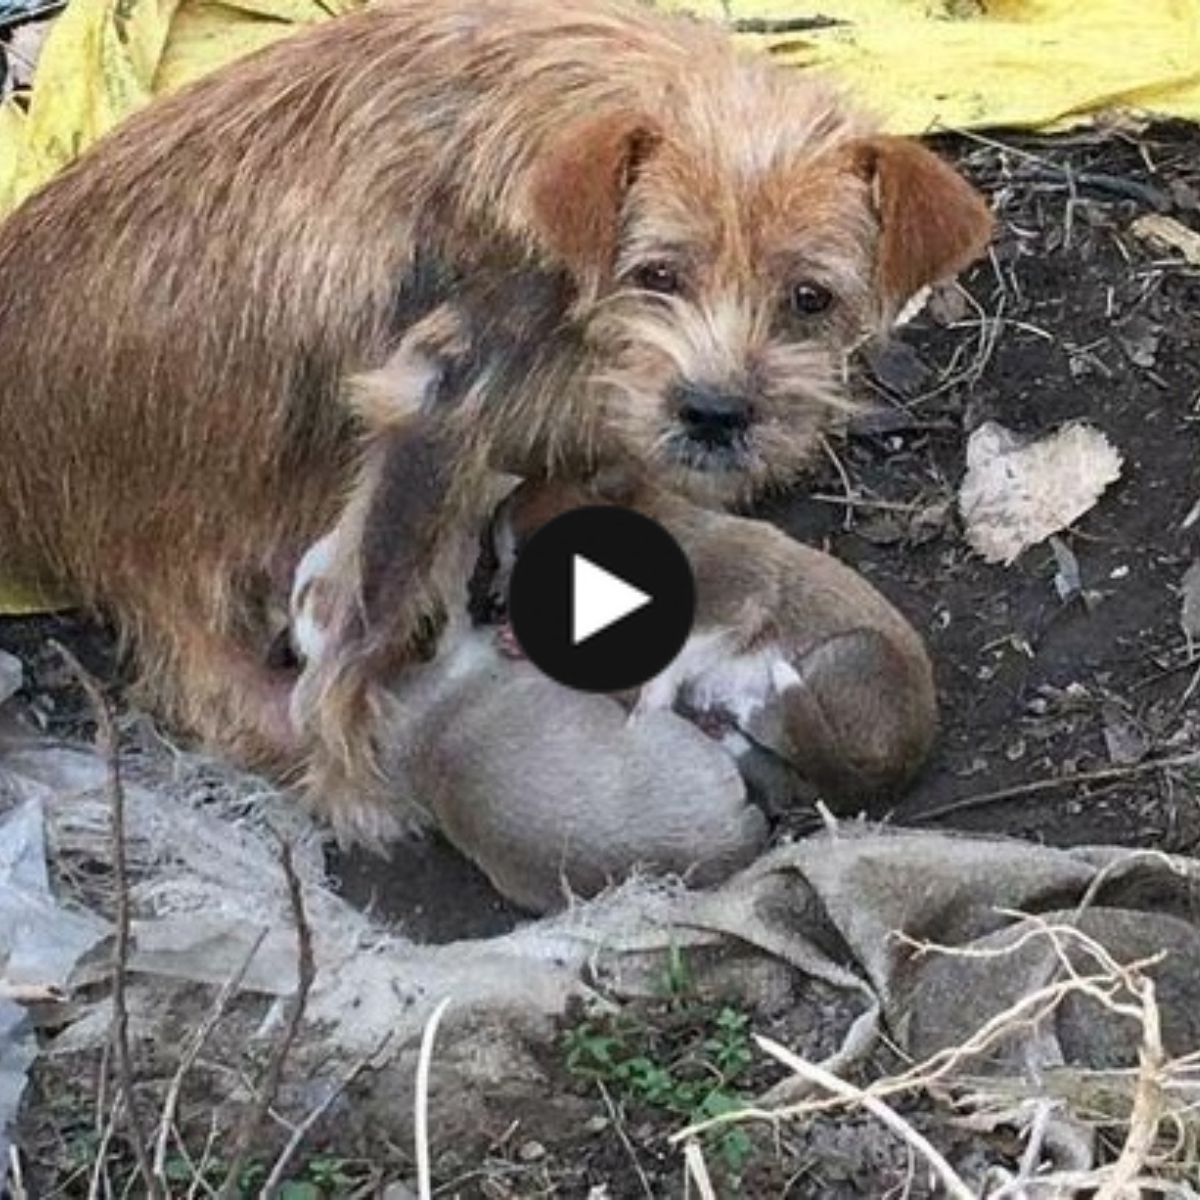 The stray mother dog begged passersby to take care of her puppy with sad eyes.